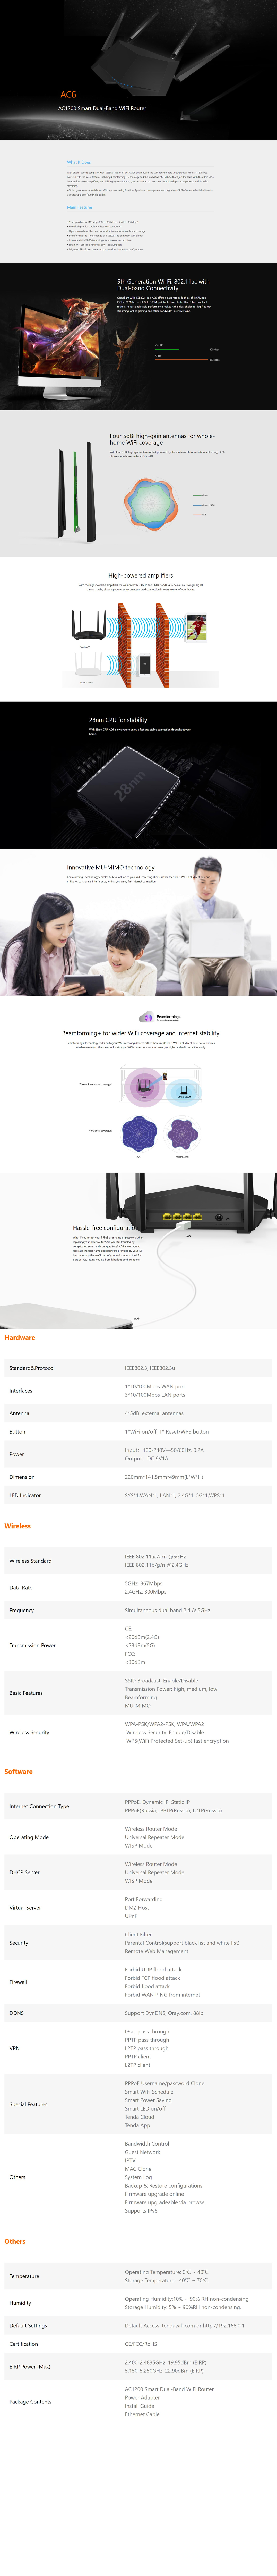 A large marketing image providing additional information about the product Tenda AC6 AC1200 Dual-Band Wi-Fi Router - Additional alt info not provided